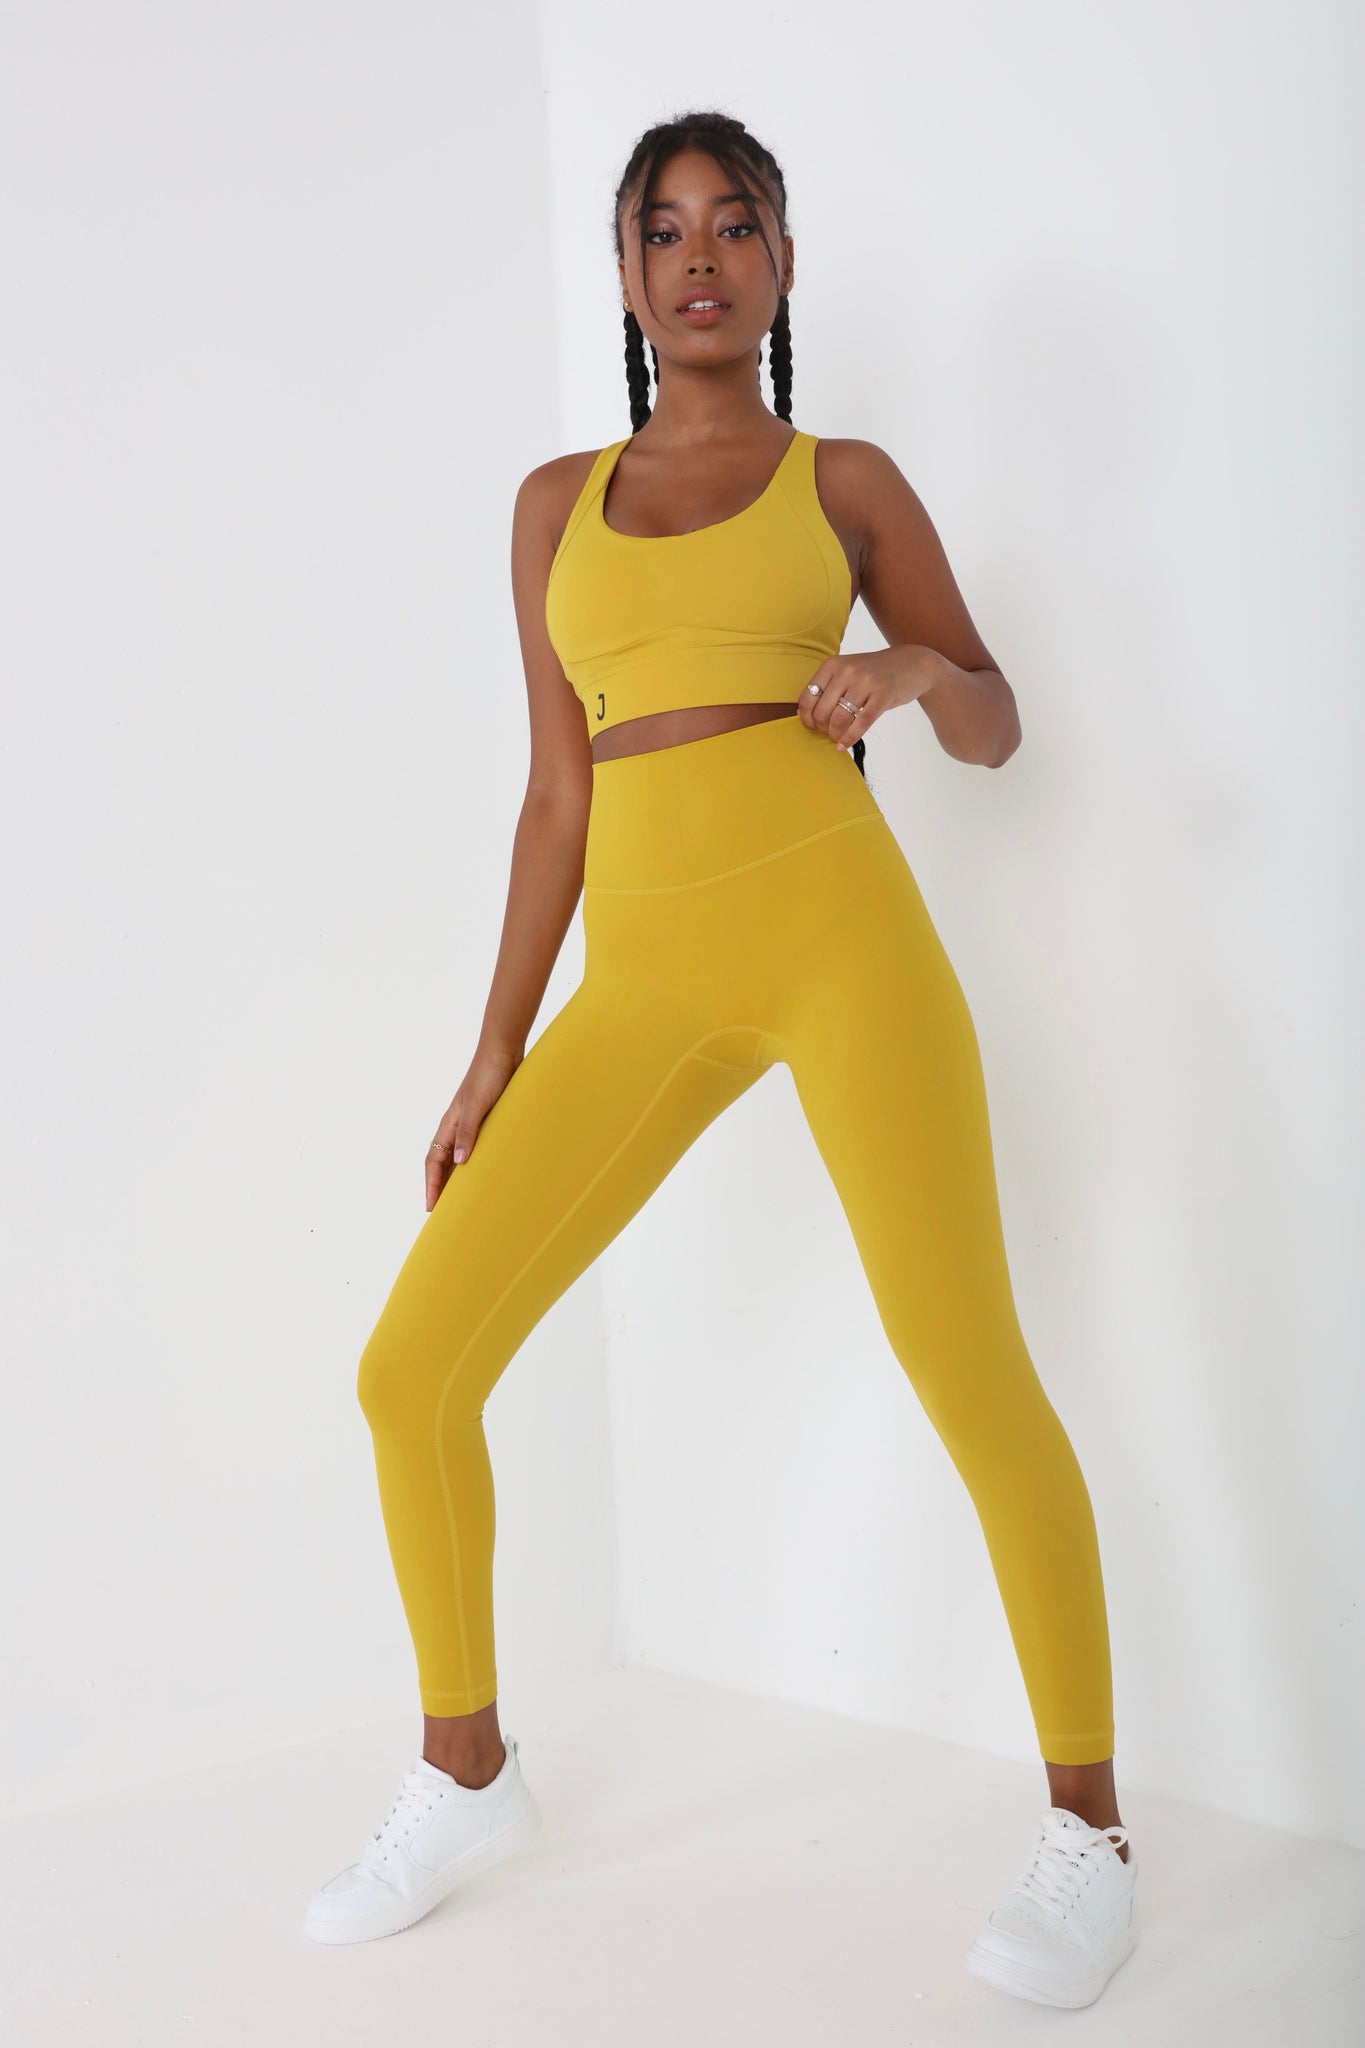 JUV fresh legging in mustard color with matching top, full body front view.